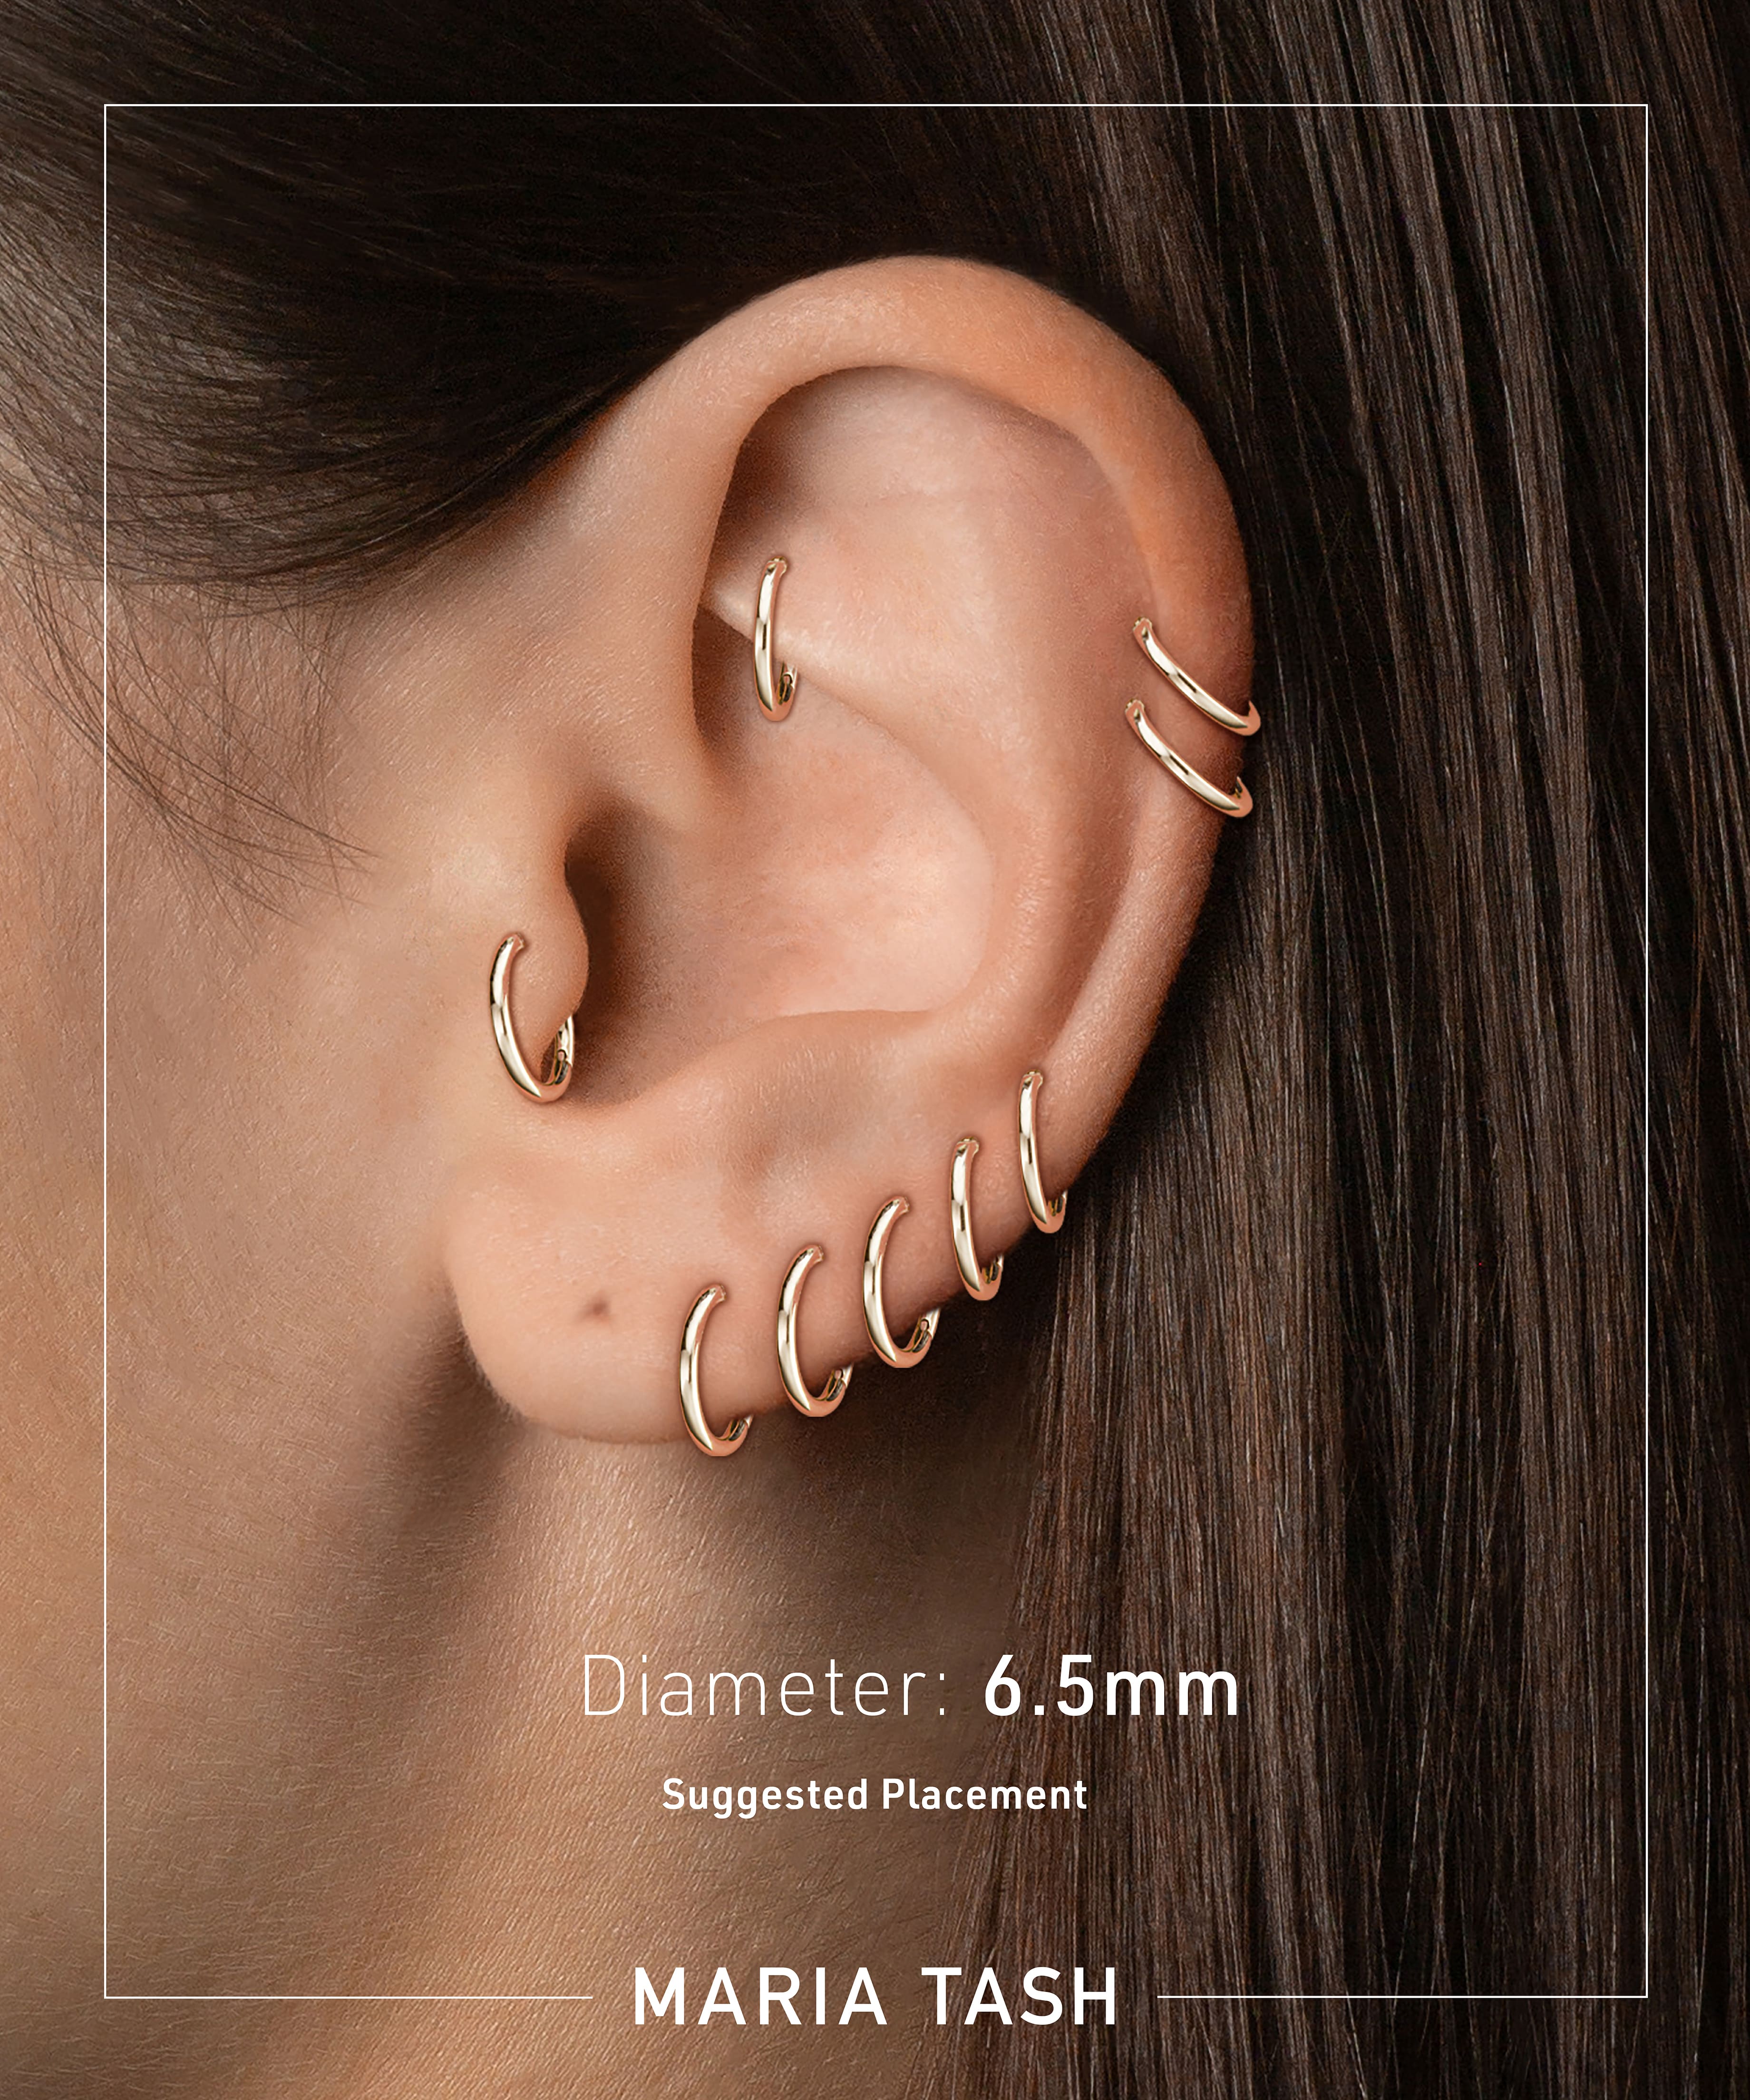 Suggested earlobe or cartilage placement for 6.5mm hoop earring size guide